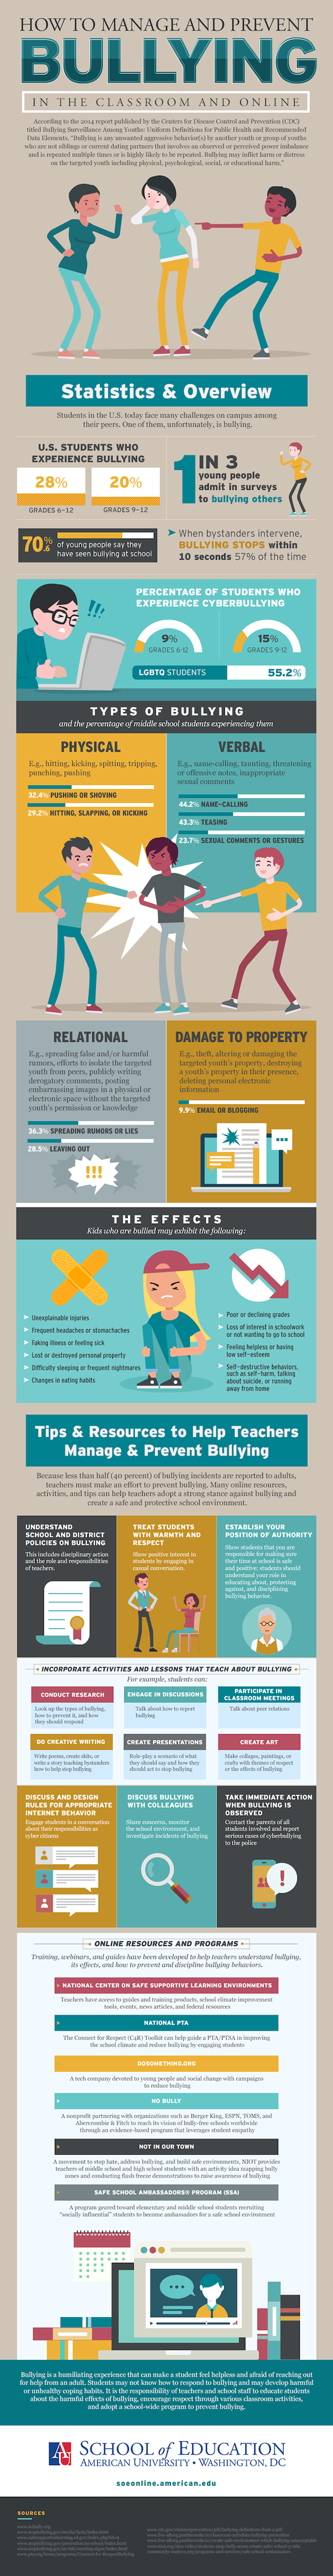 Infographic for How to Manage and Prevent Bullying